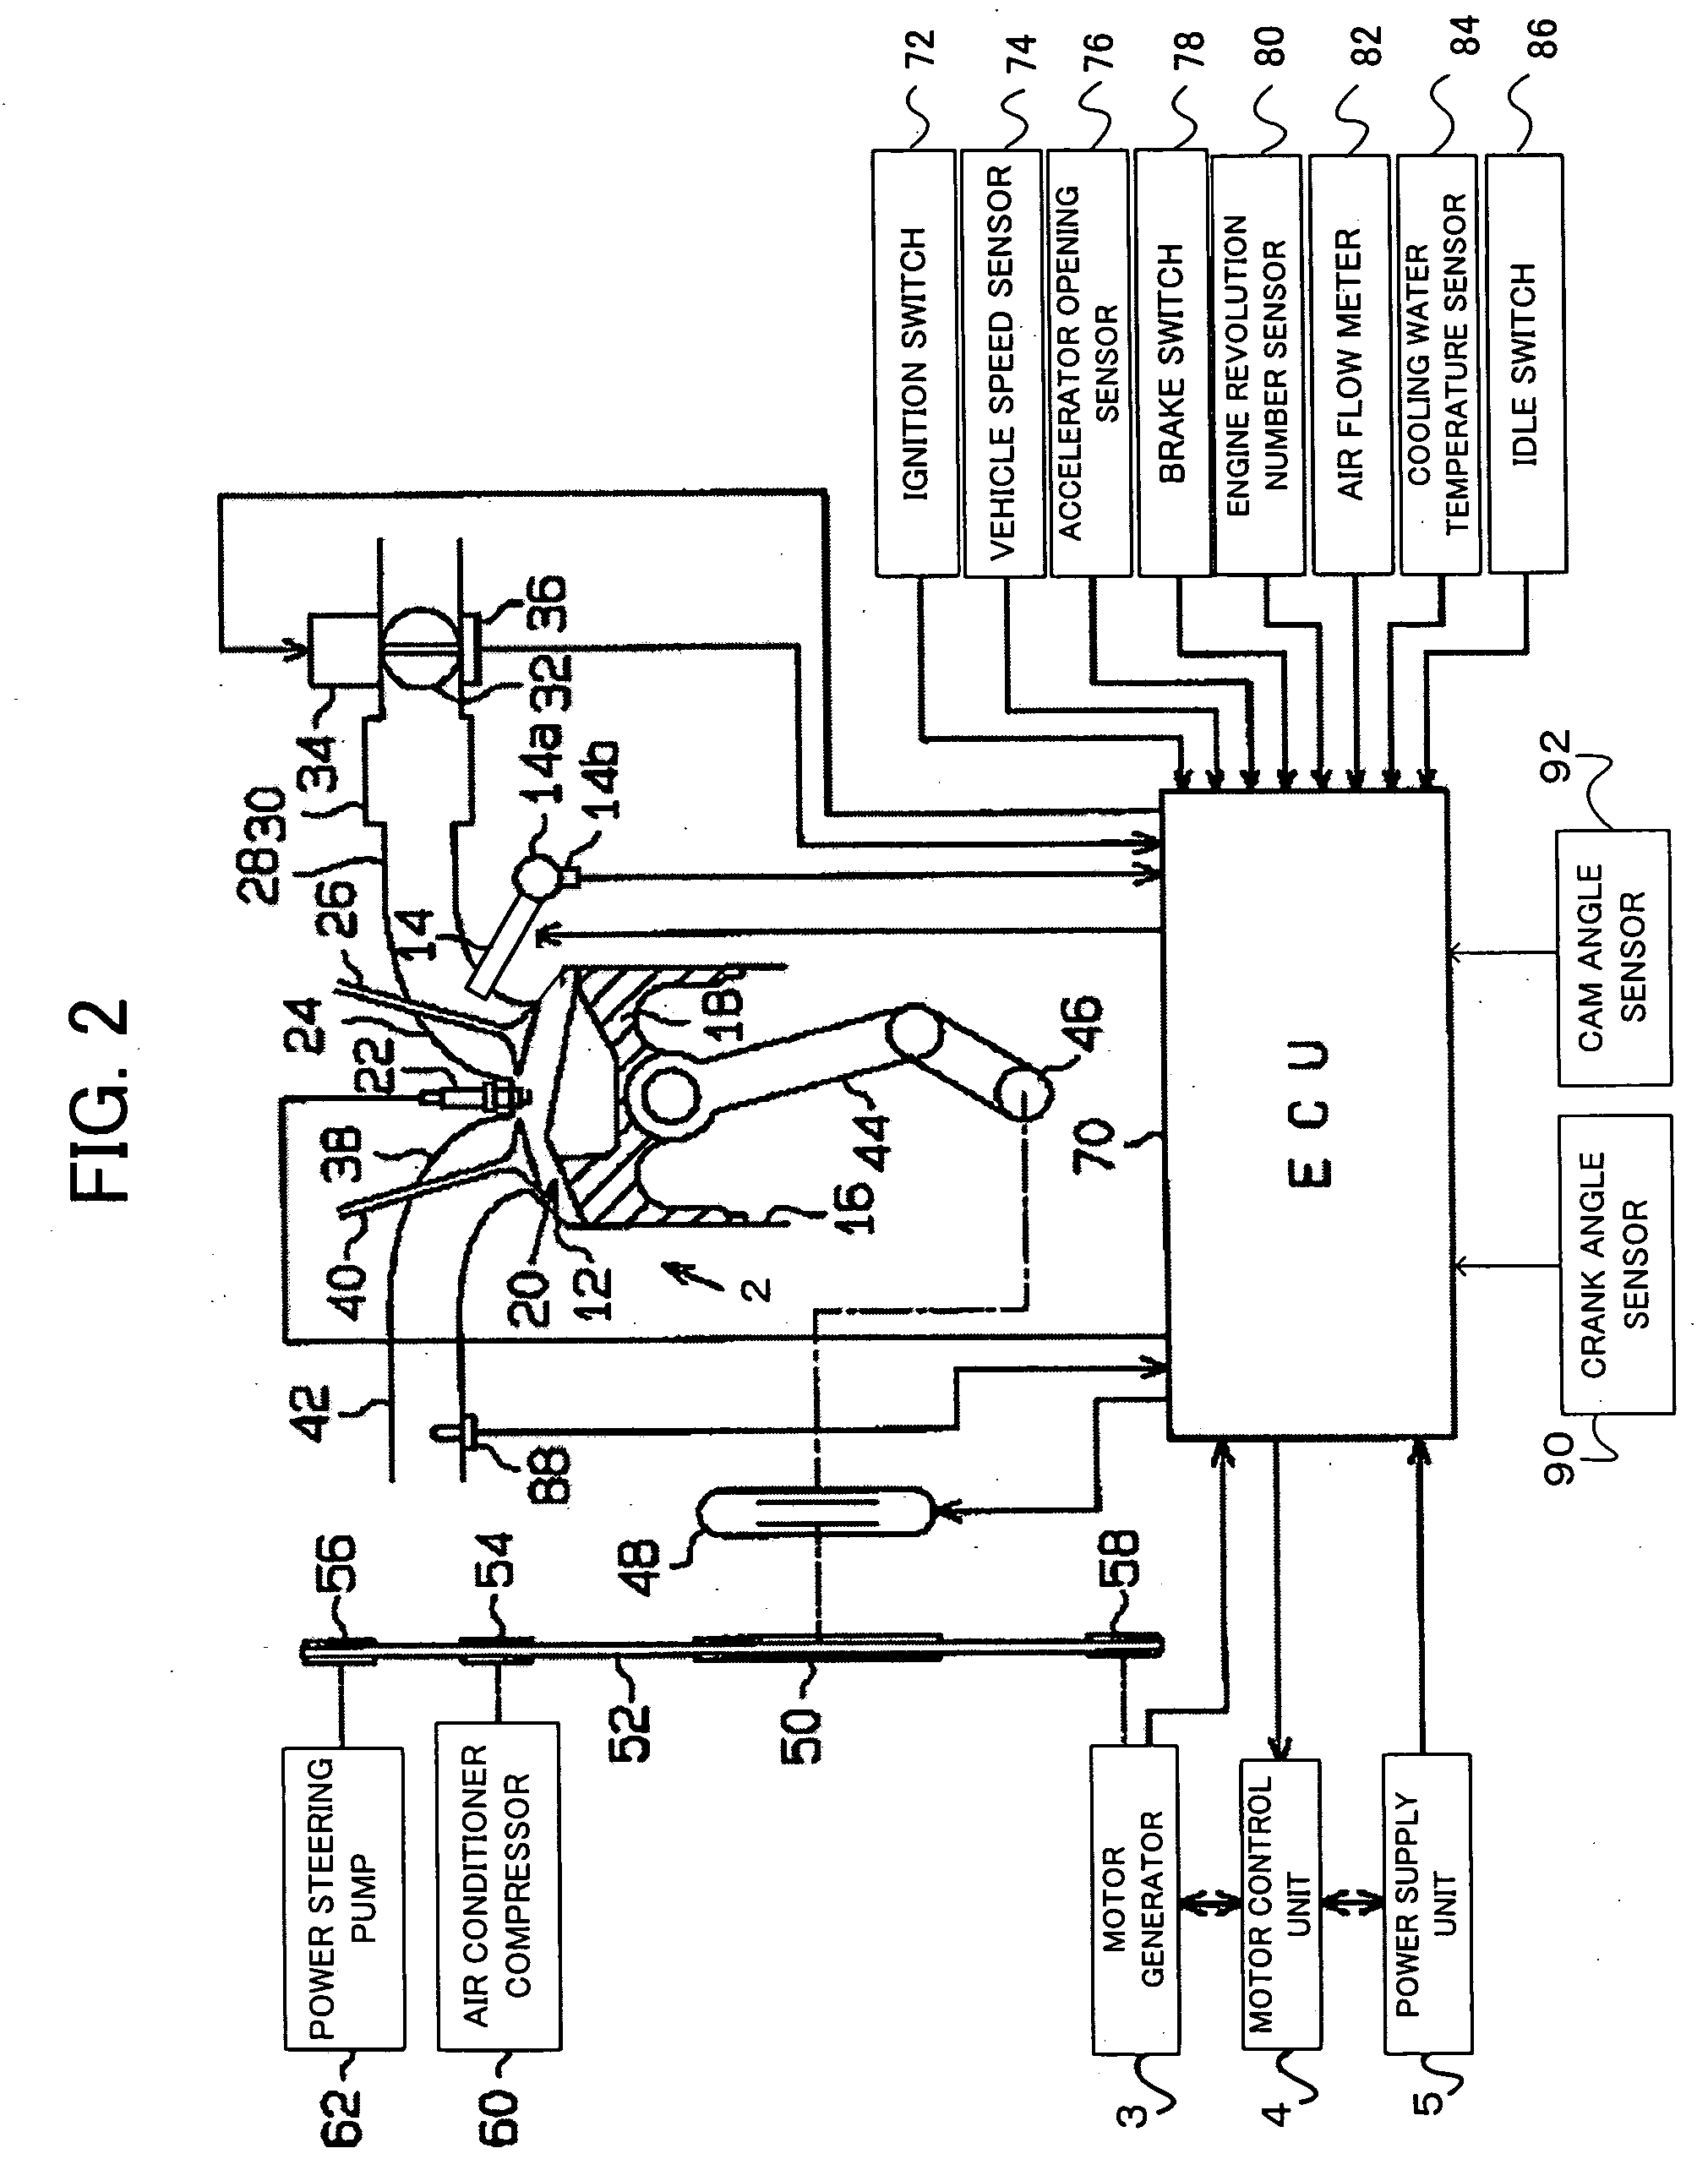 Stop position estimating apparatus of internal combustion engine